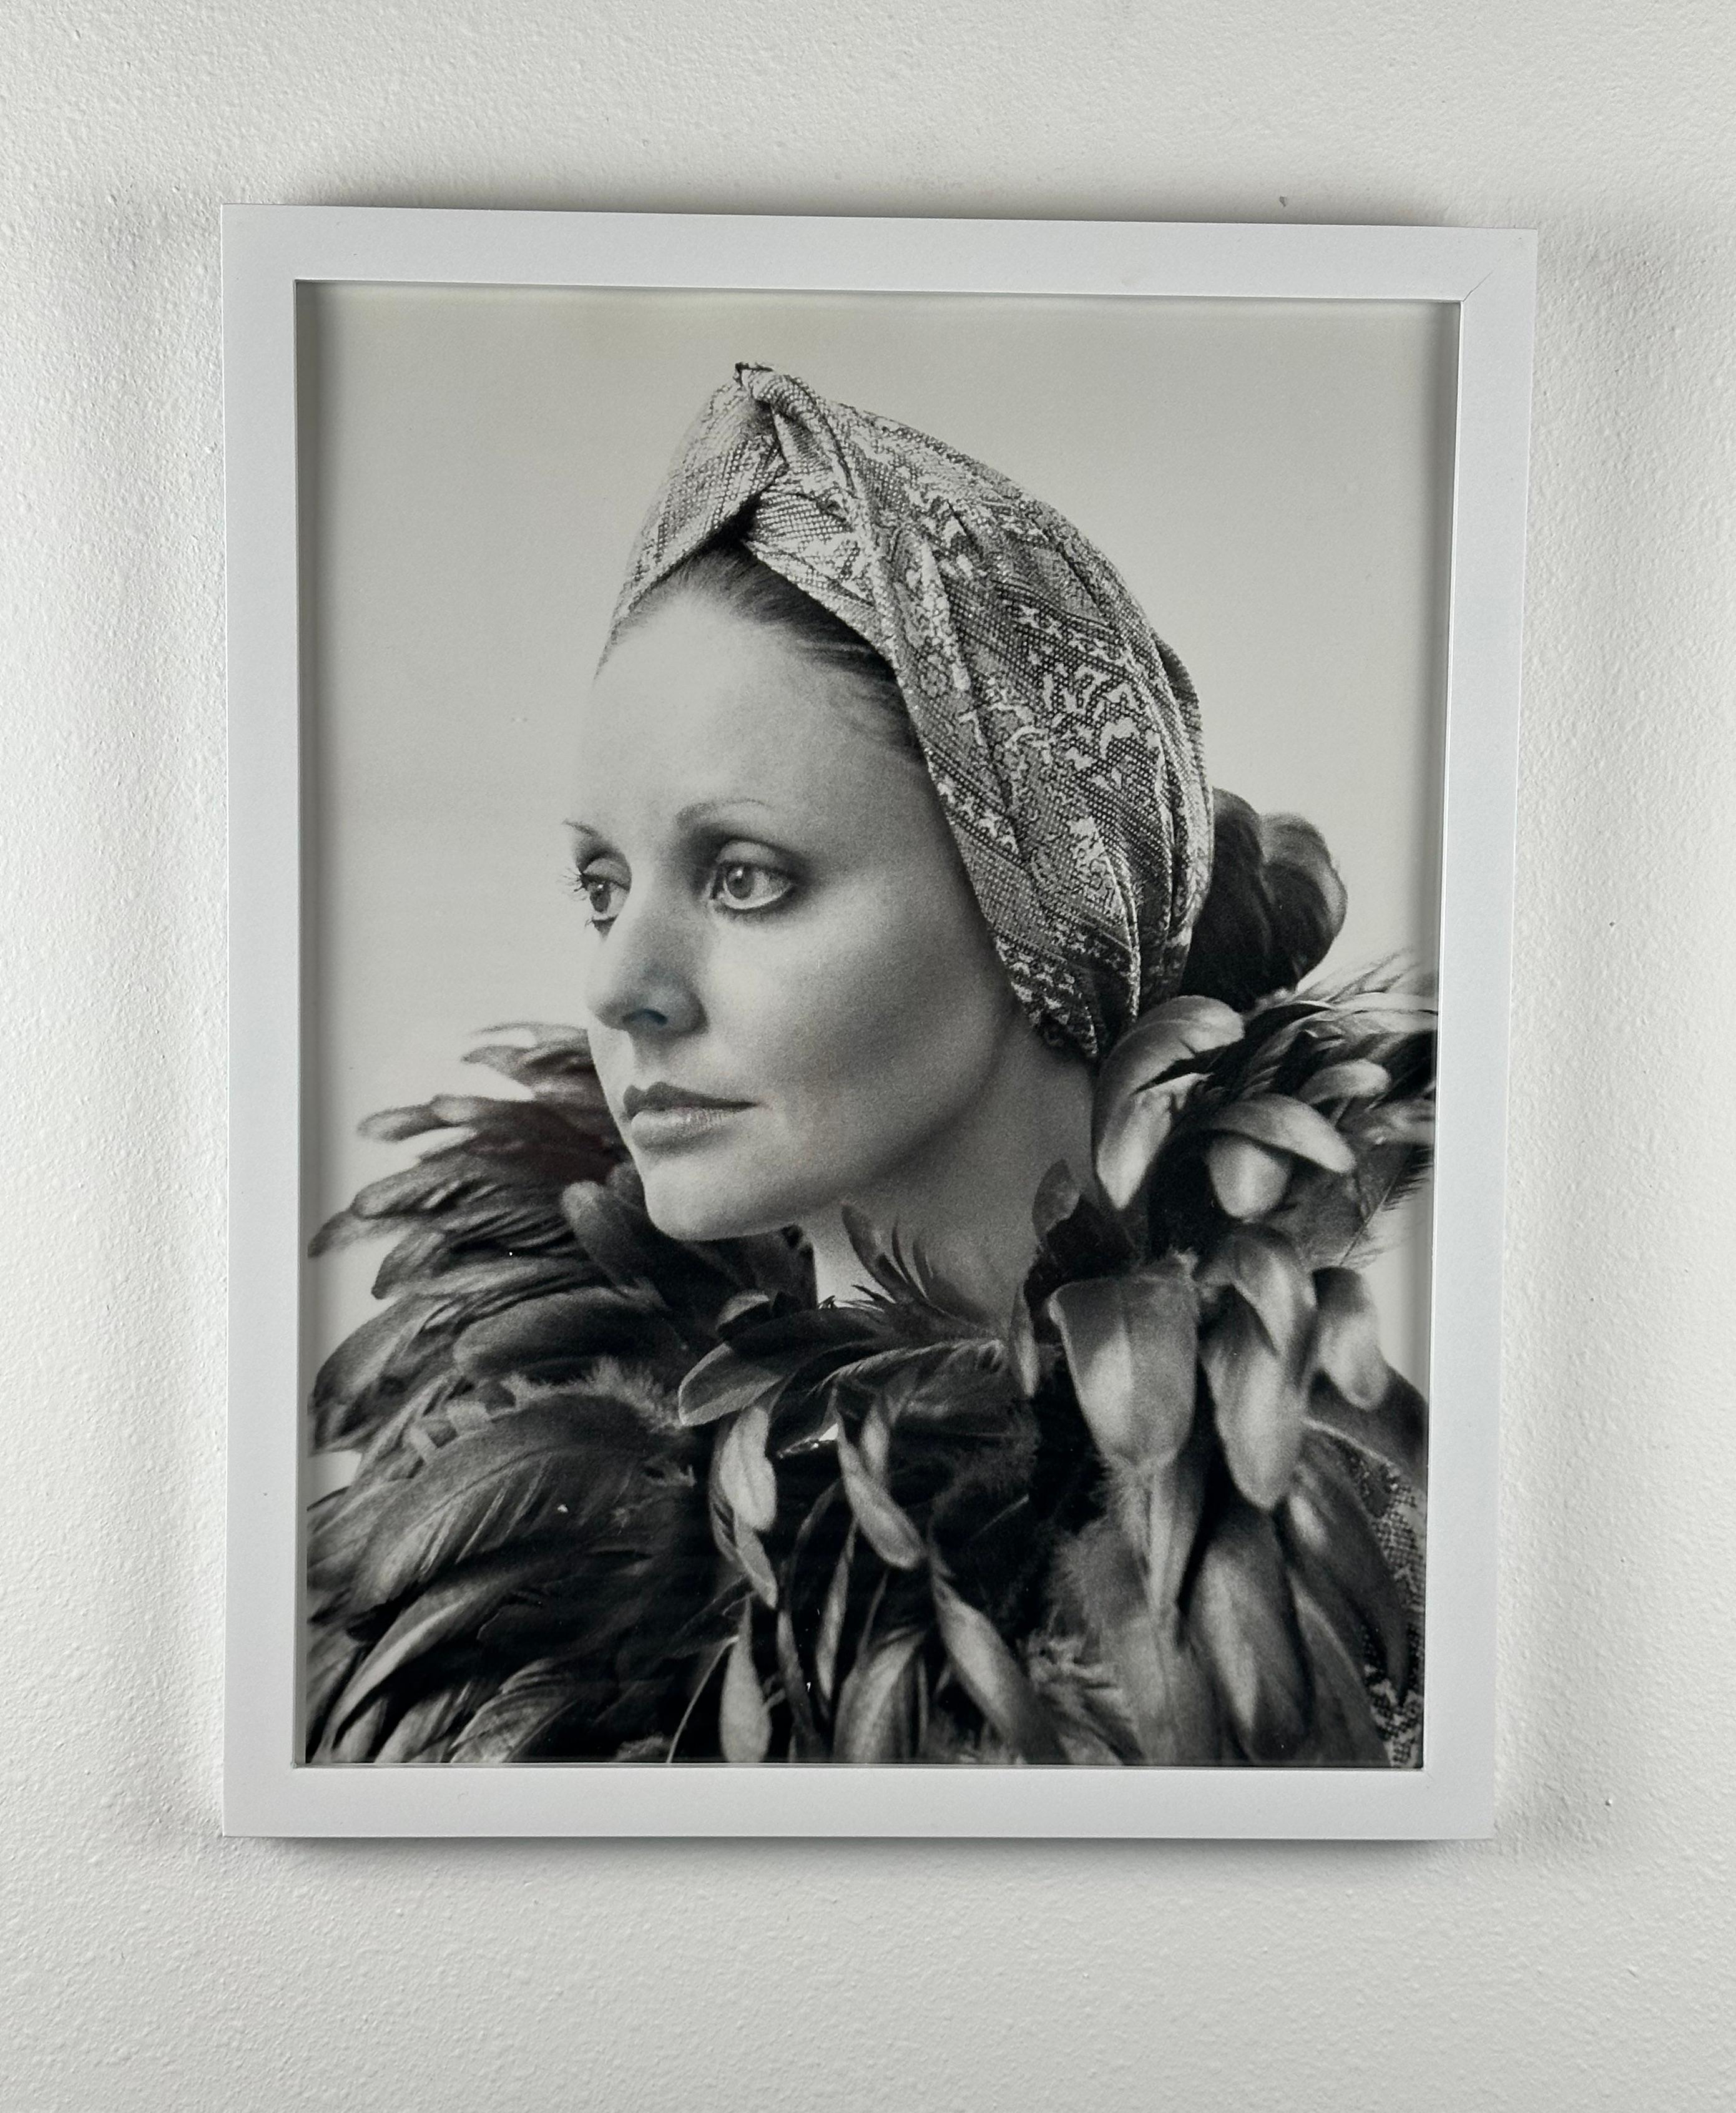 1970s Fashion editorial photo Turban and Feathers - American Realist Photograph by Kenn Duncan